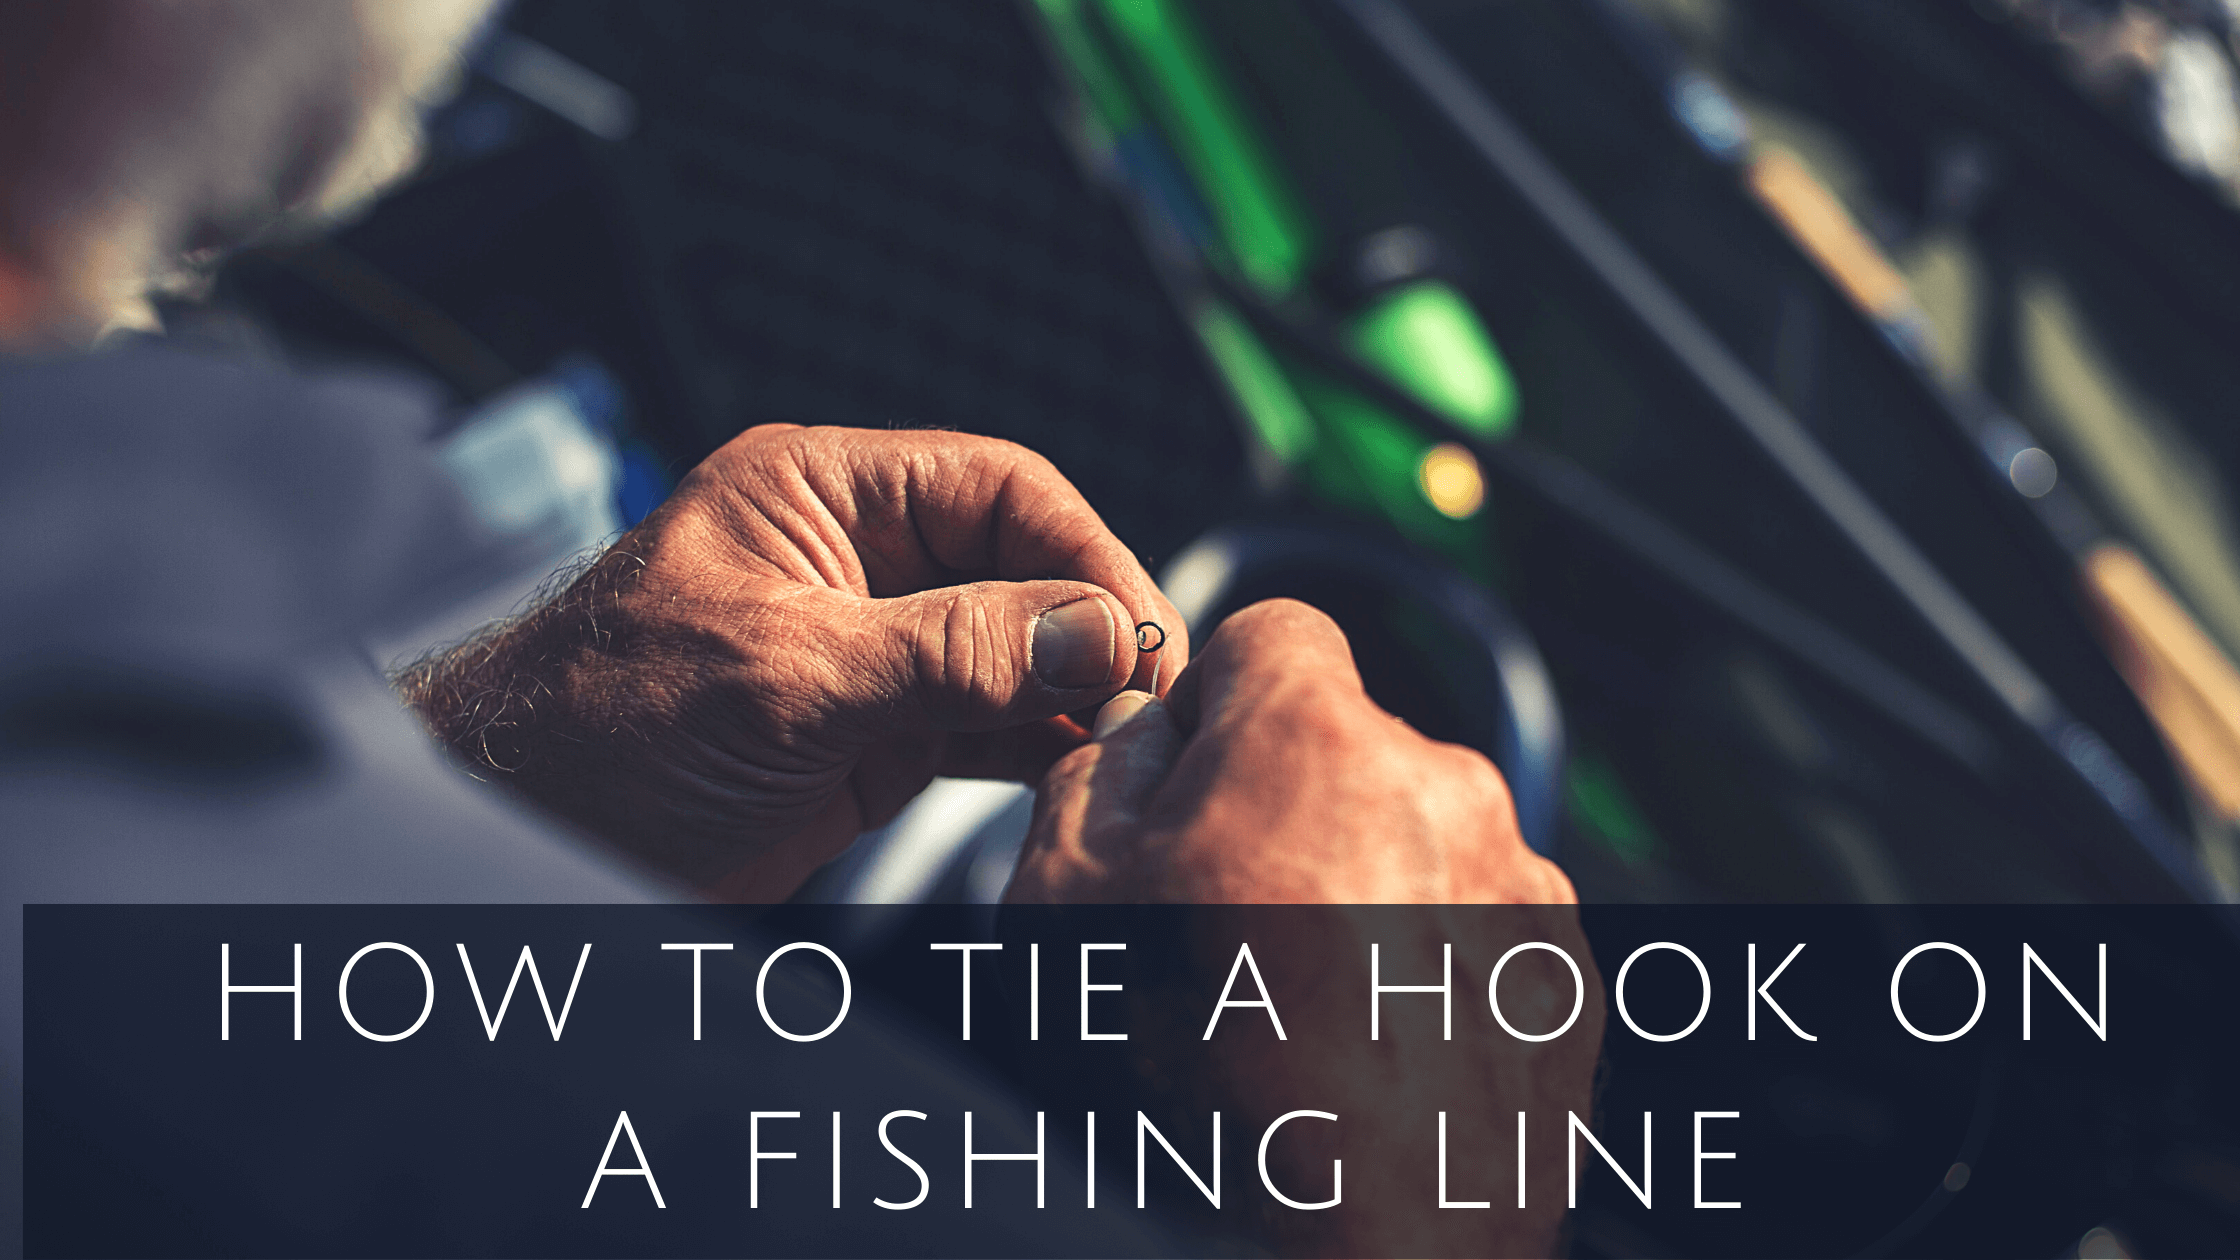 How to Tie A Fishing Hook on String